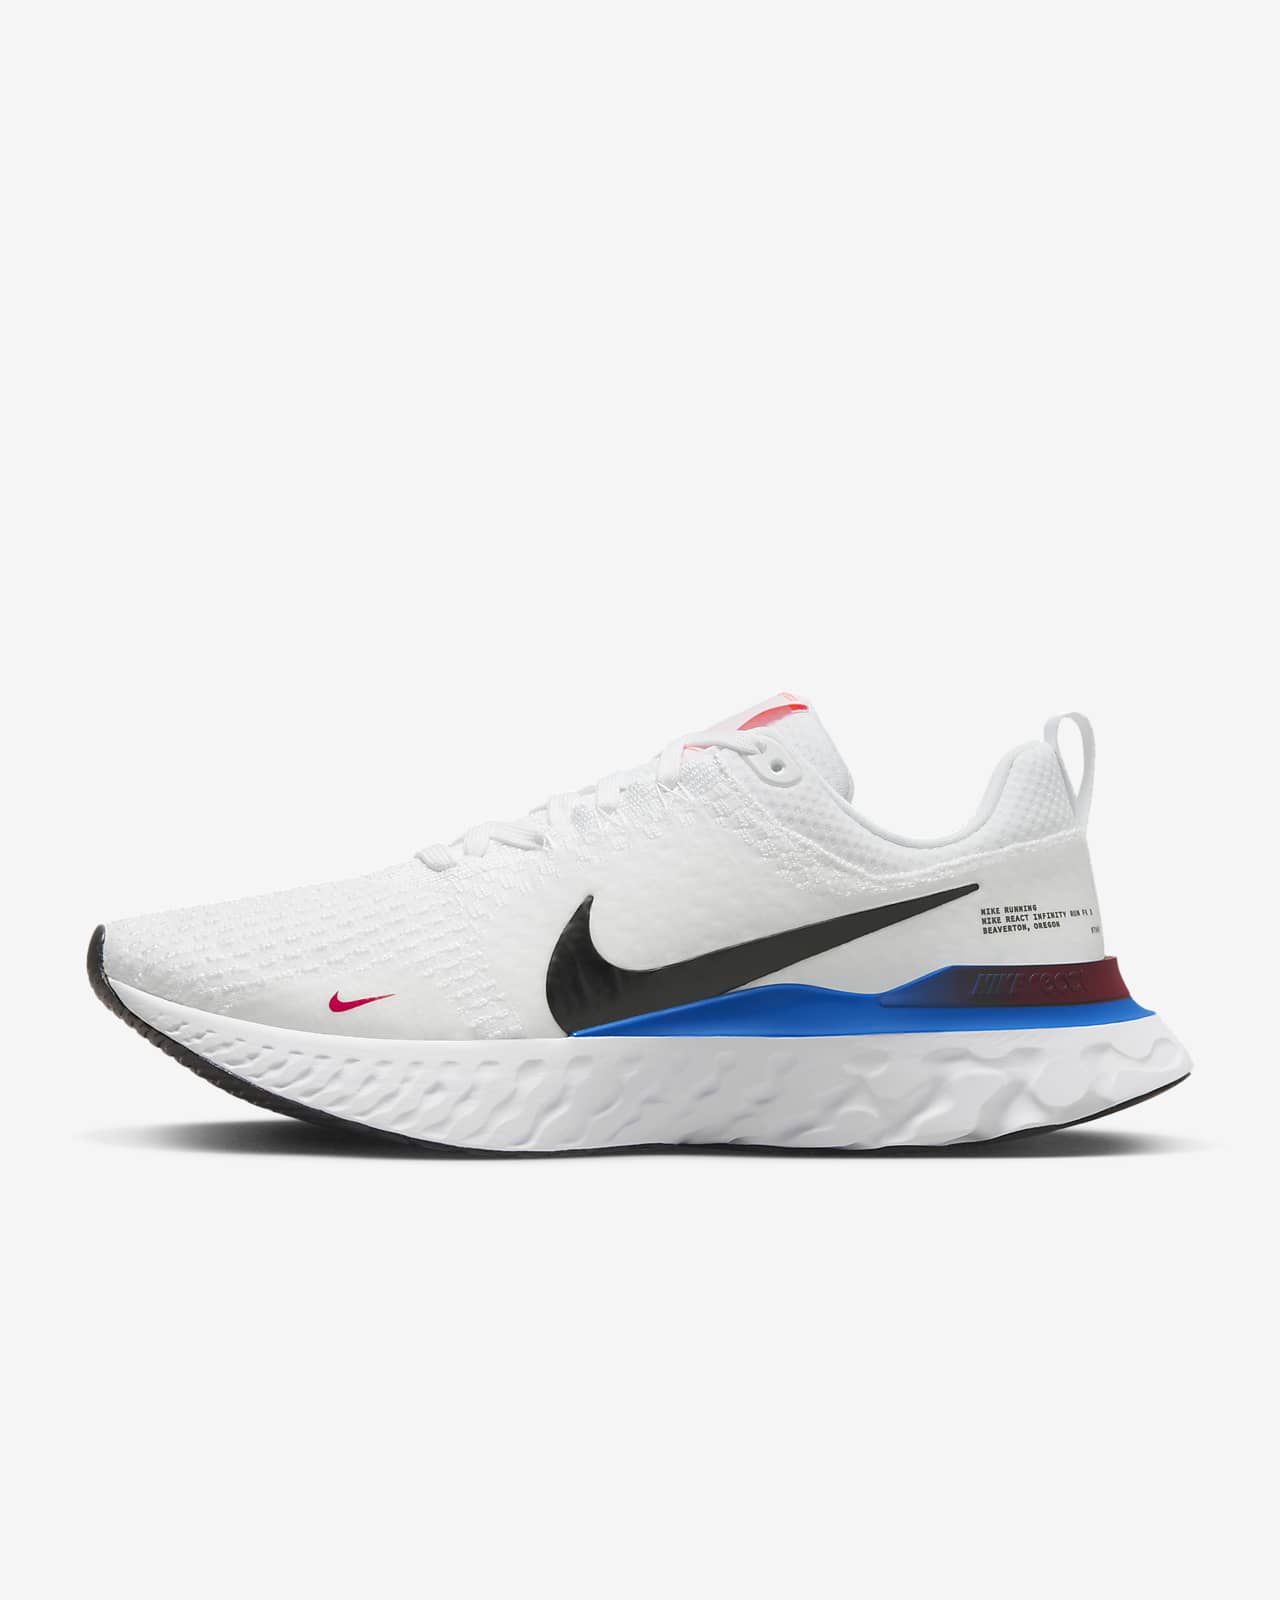 Chaussure de running sur route Nike React Infinity Run Flyknit 3 pour homme